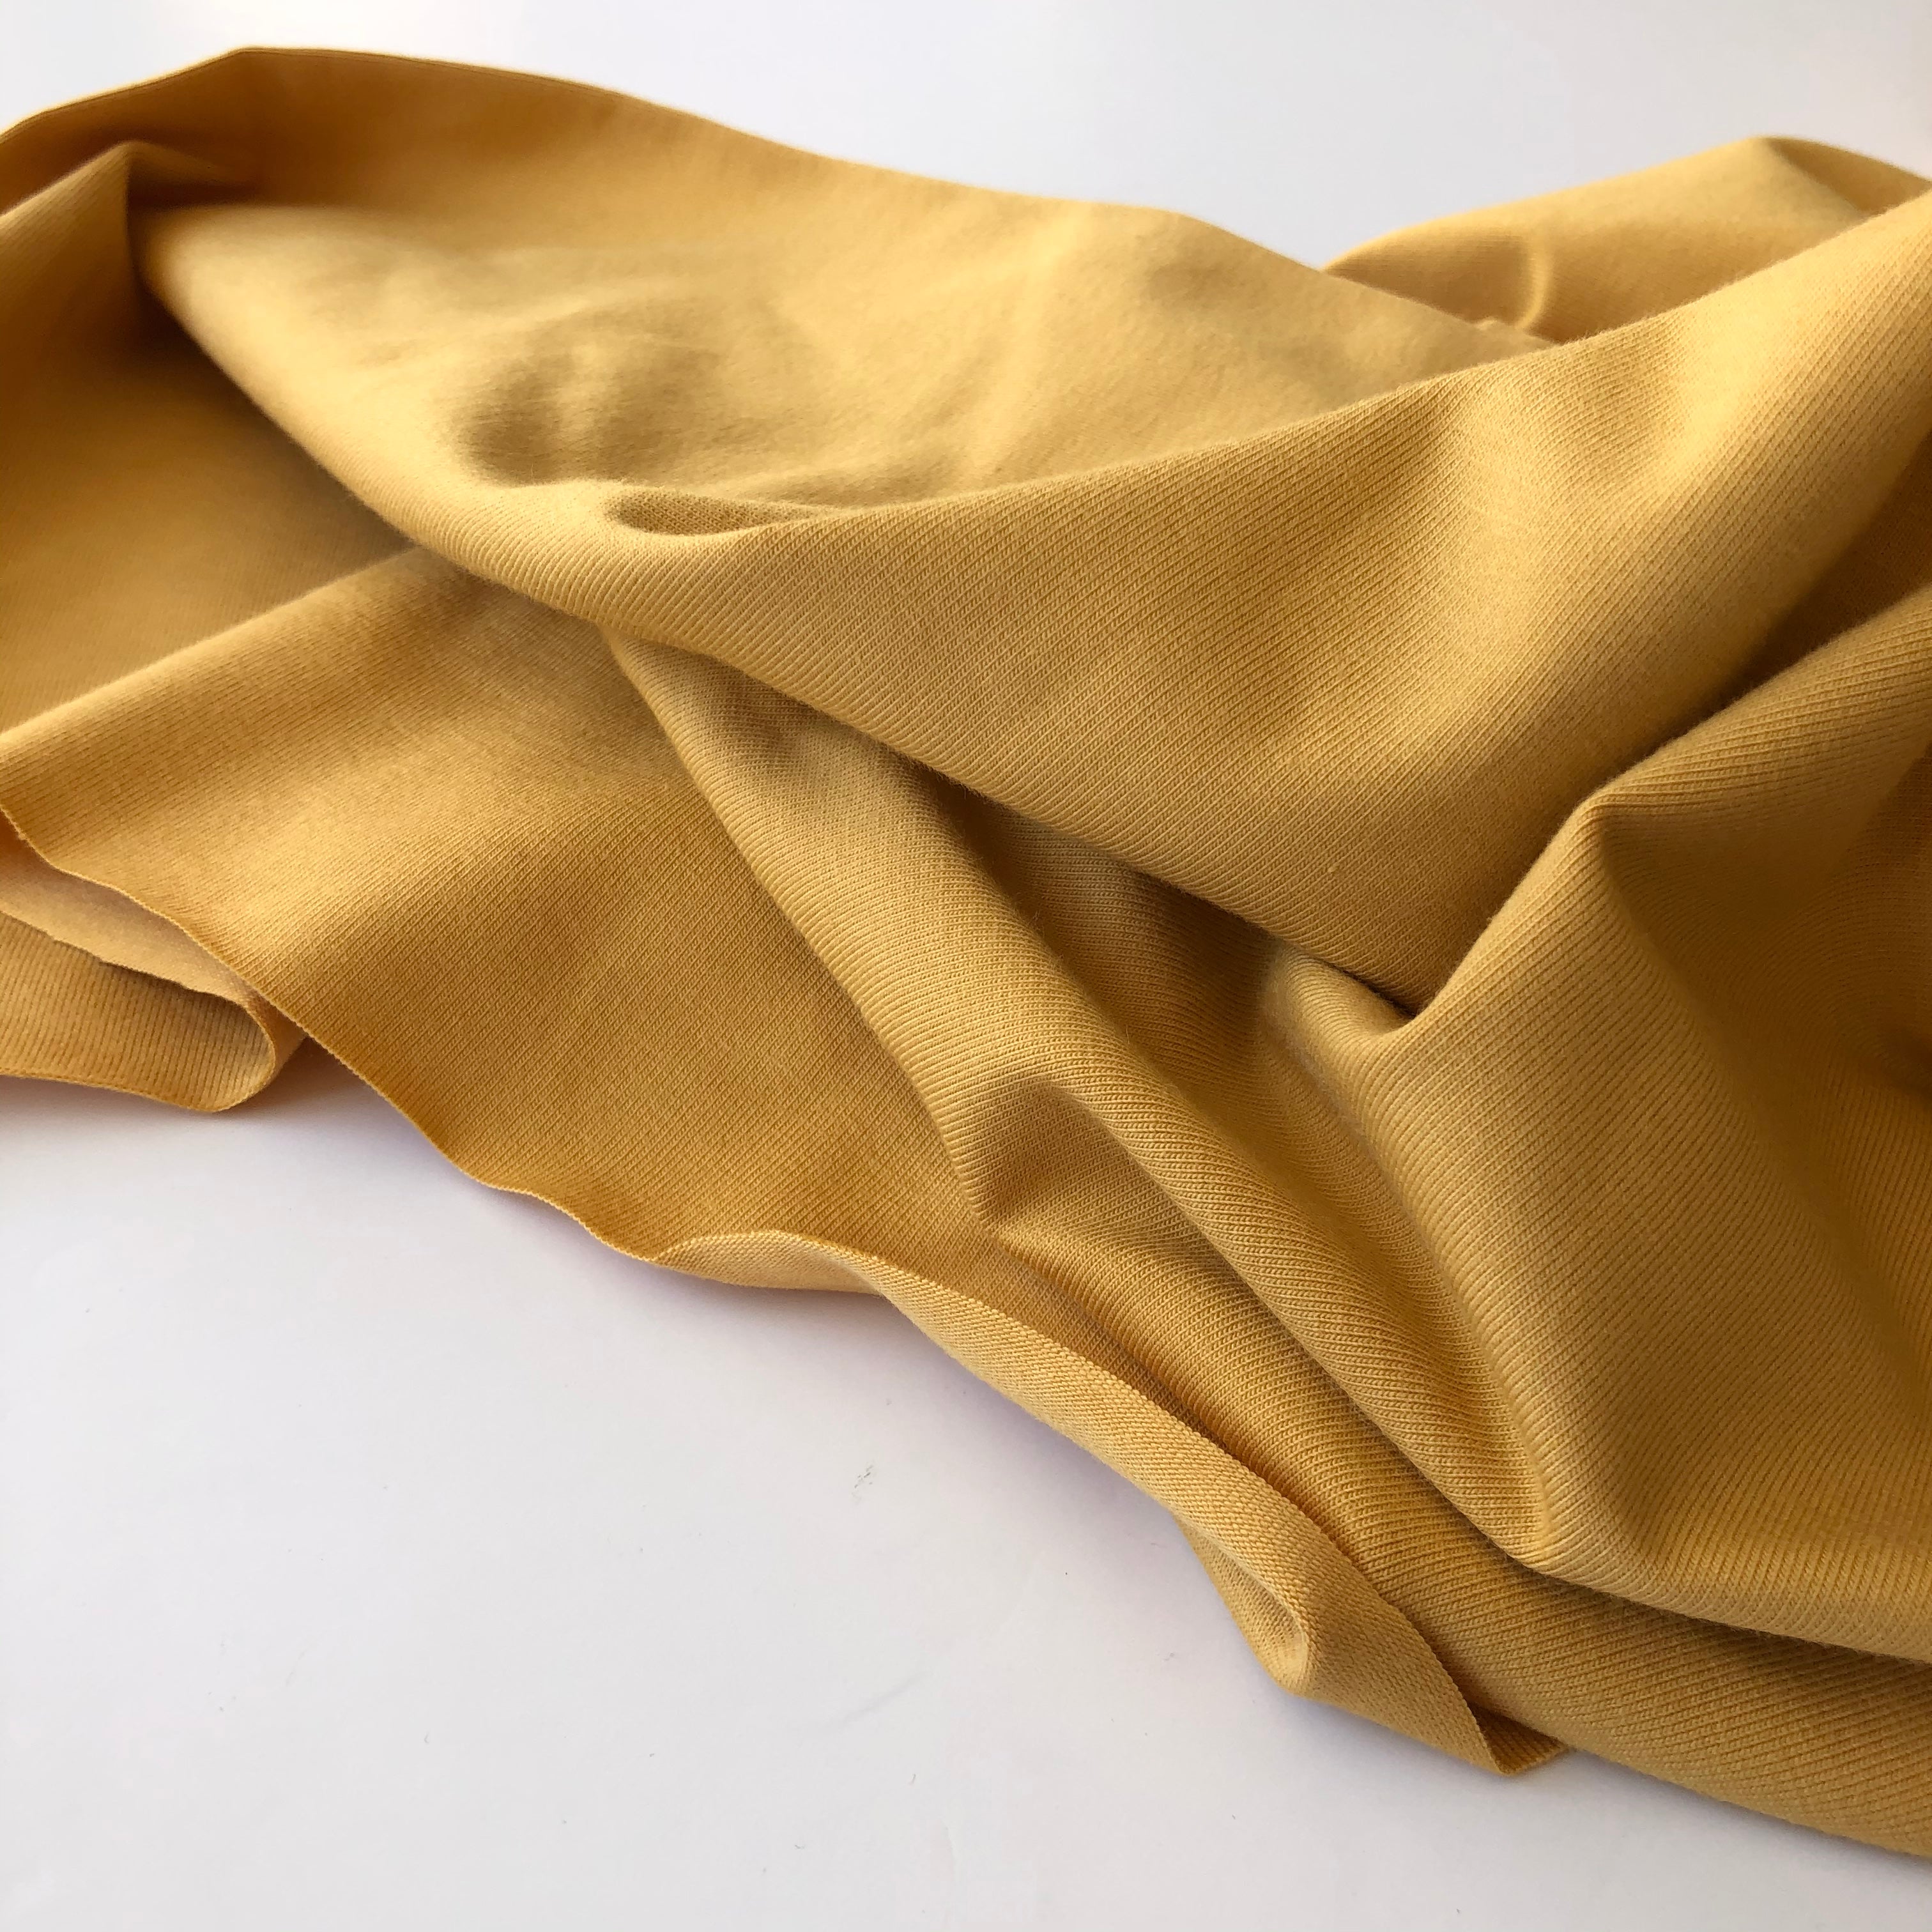 REMNANT 0.85 Metre - Essential Chic Amber Plain Cotton Jersey Fabric